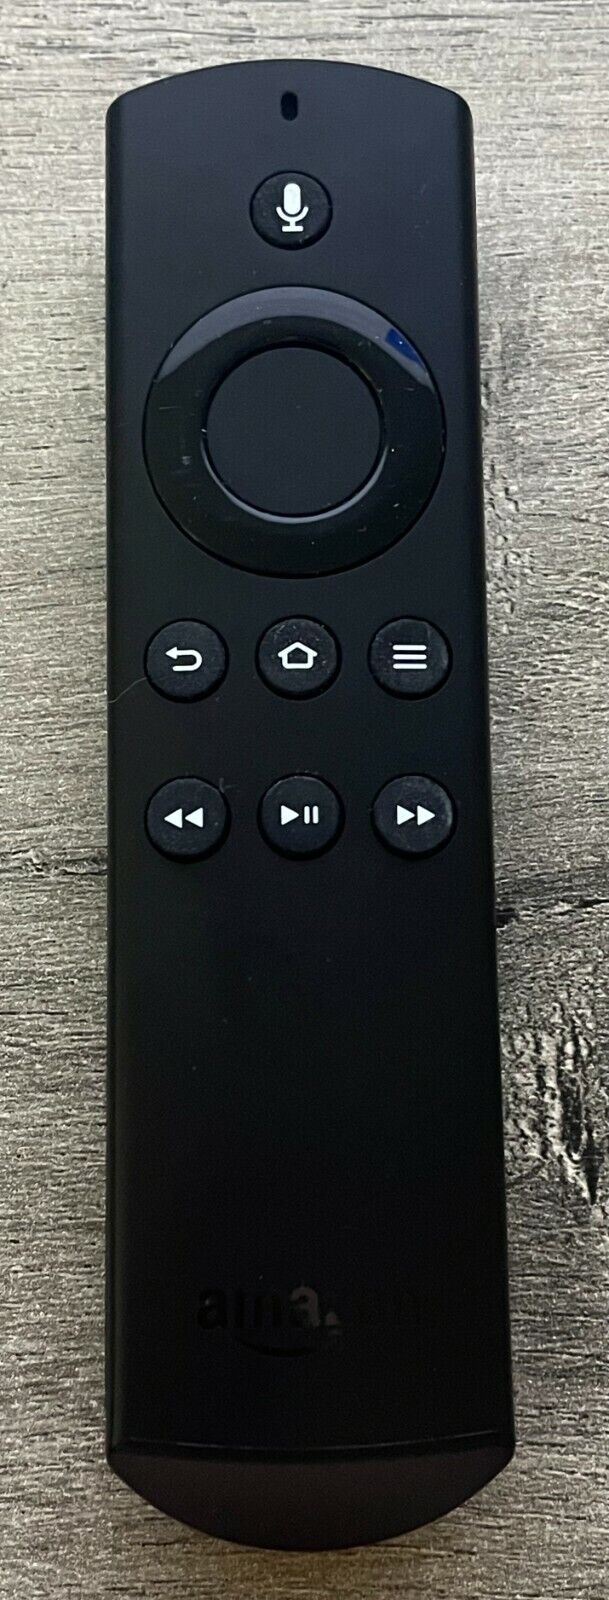 Amazon Fire Stick Remote DR49WK B OEM Control Alexa Voice Control Gen 1 Remote Model: Amazon Fire TV Stick Country/Re